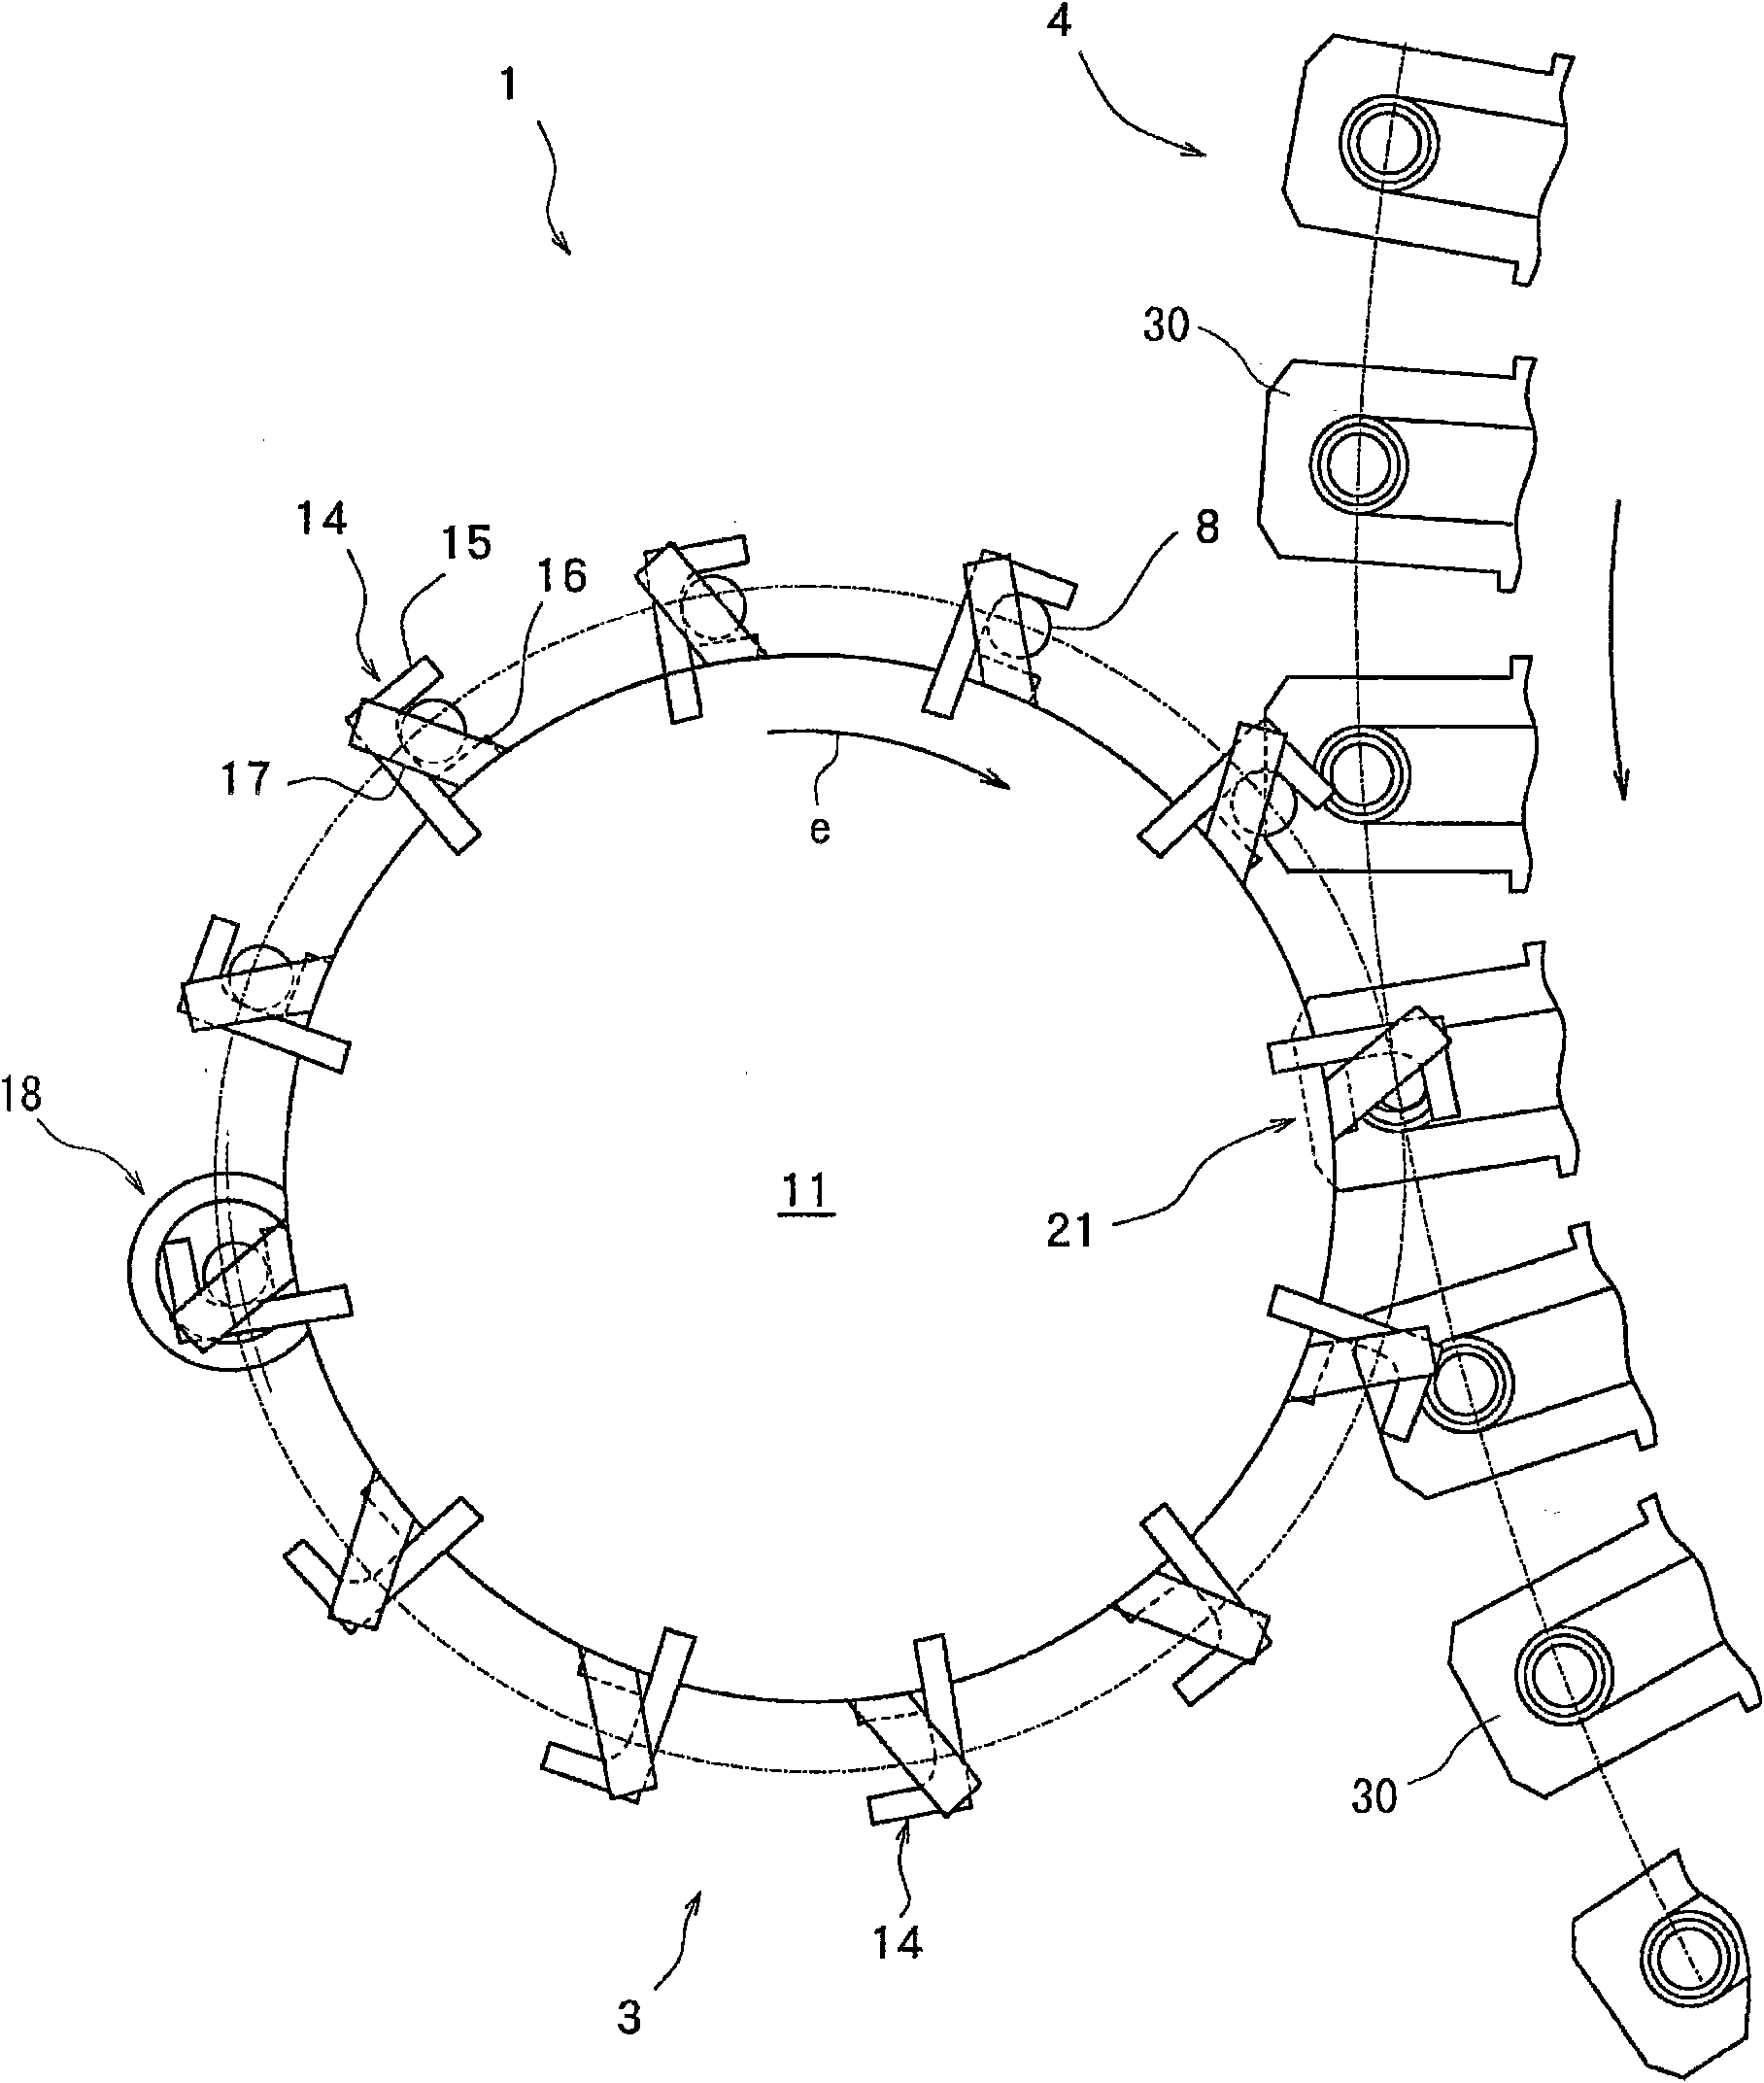 Die head for forming multilayered resin and extruder having the same